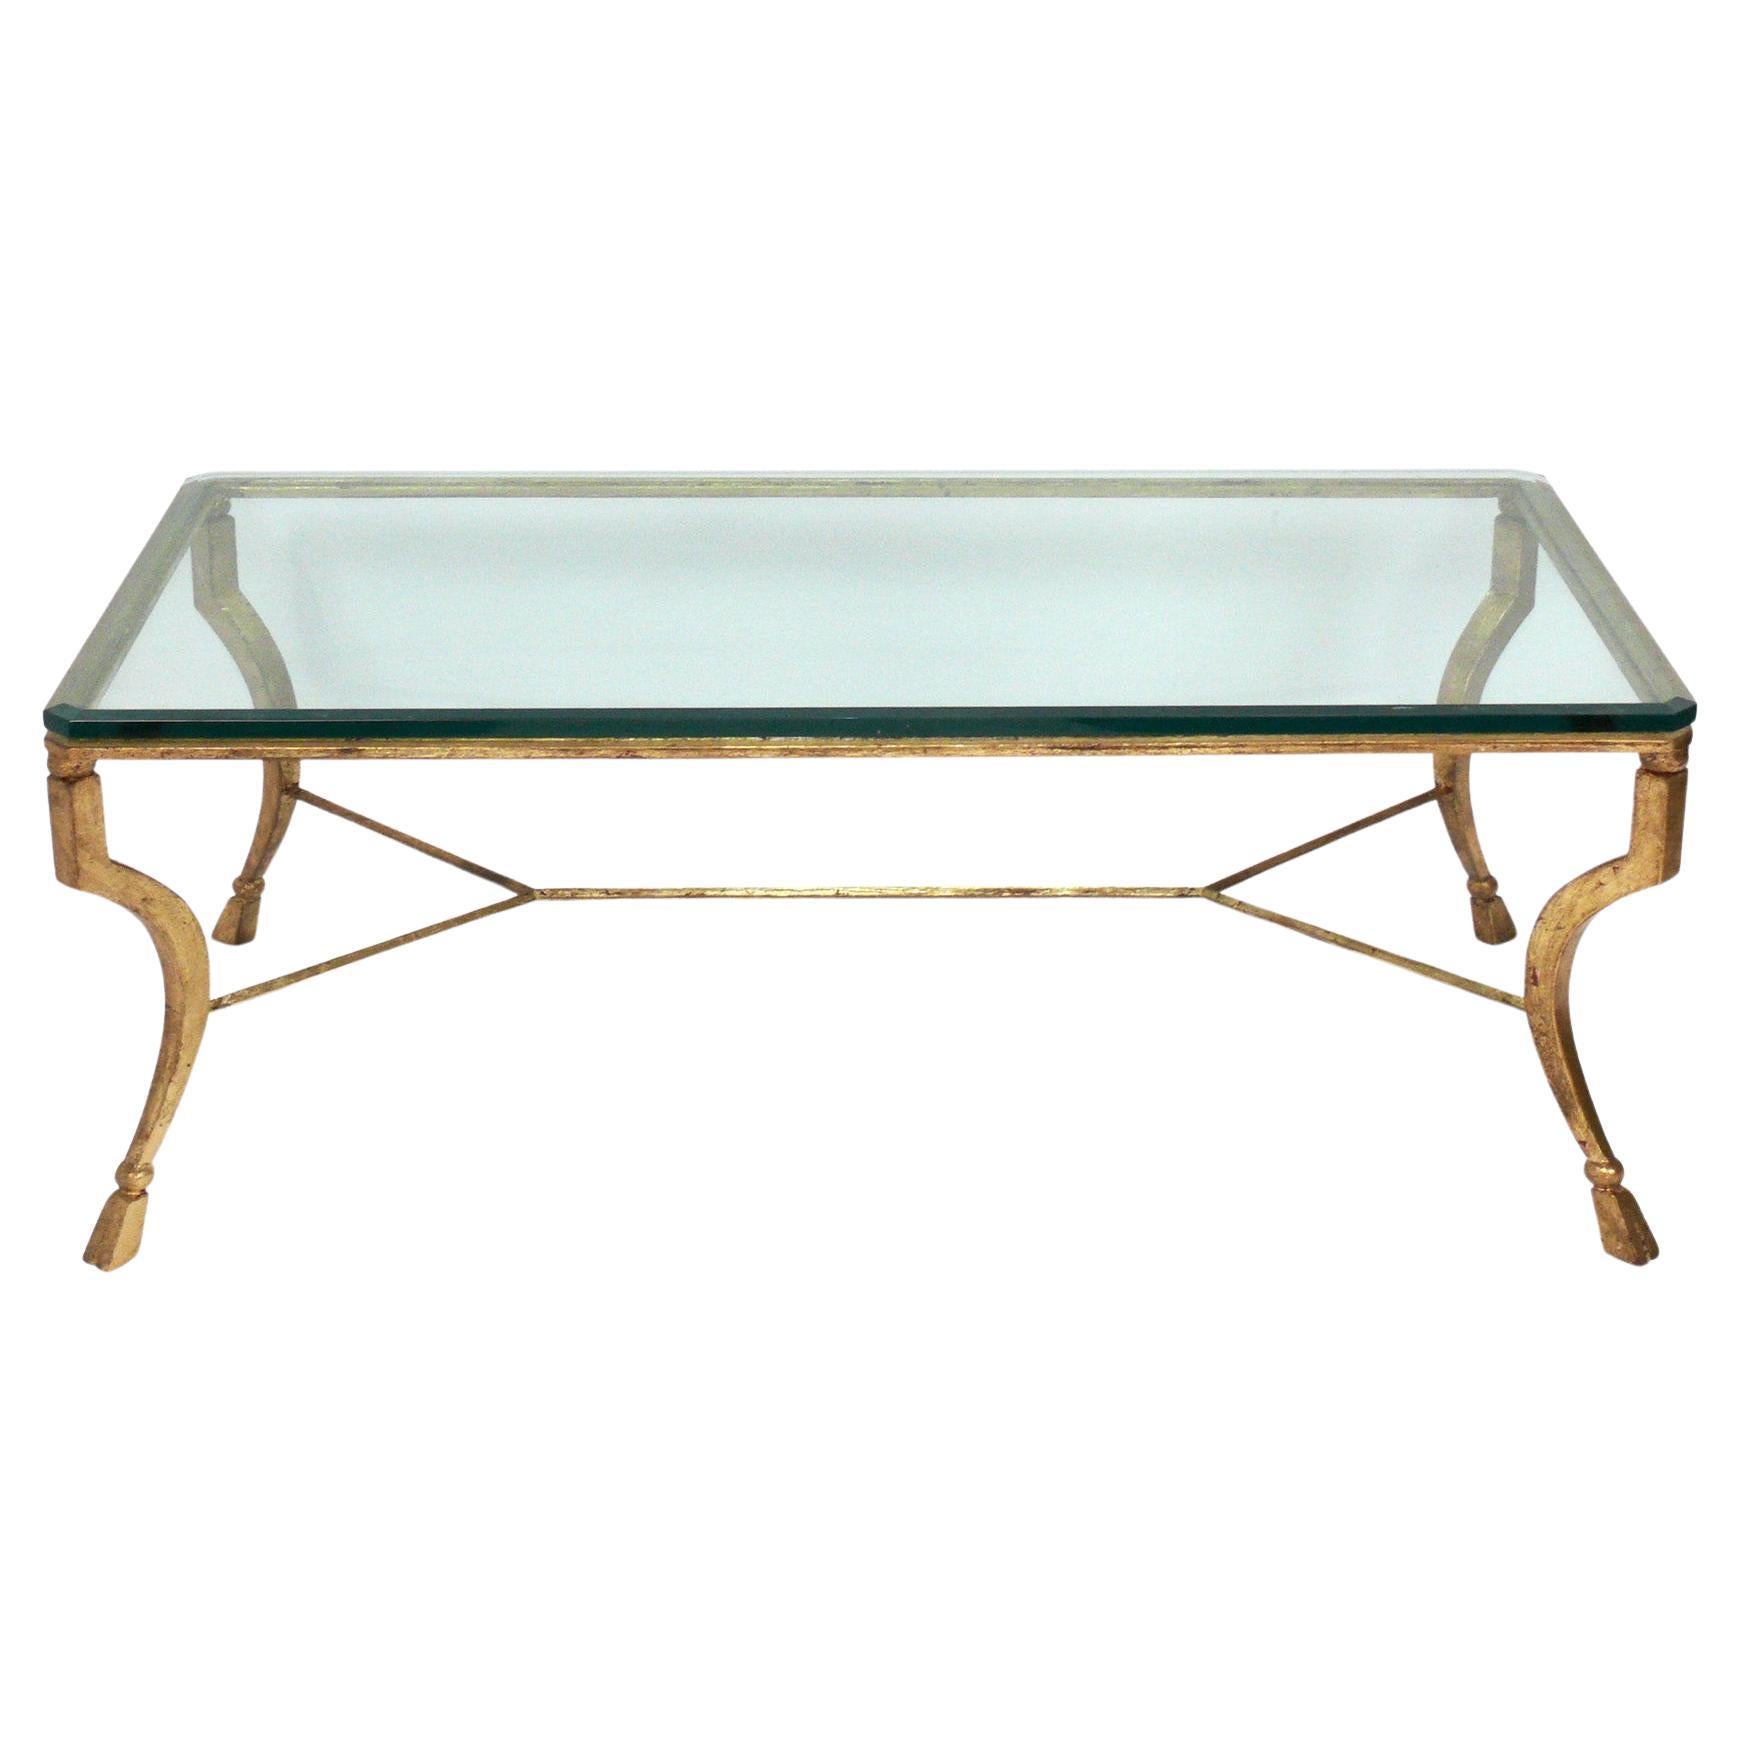 French Gilt Iron Coffee Table Attributed to Maison Ramsay